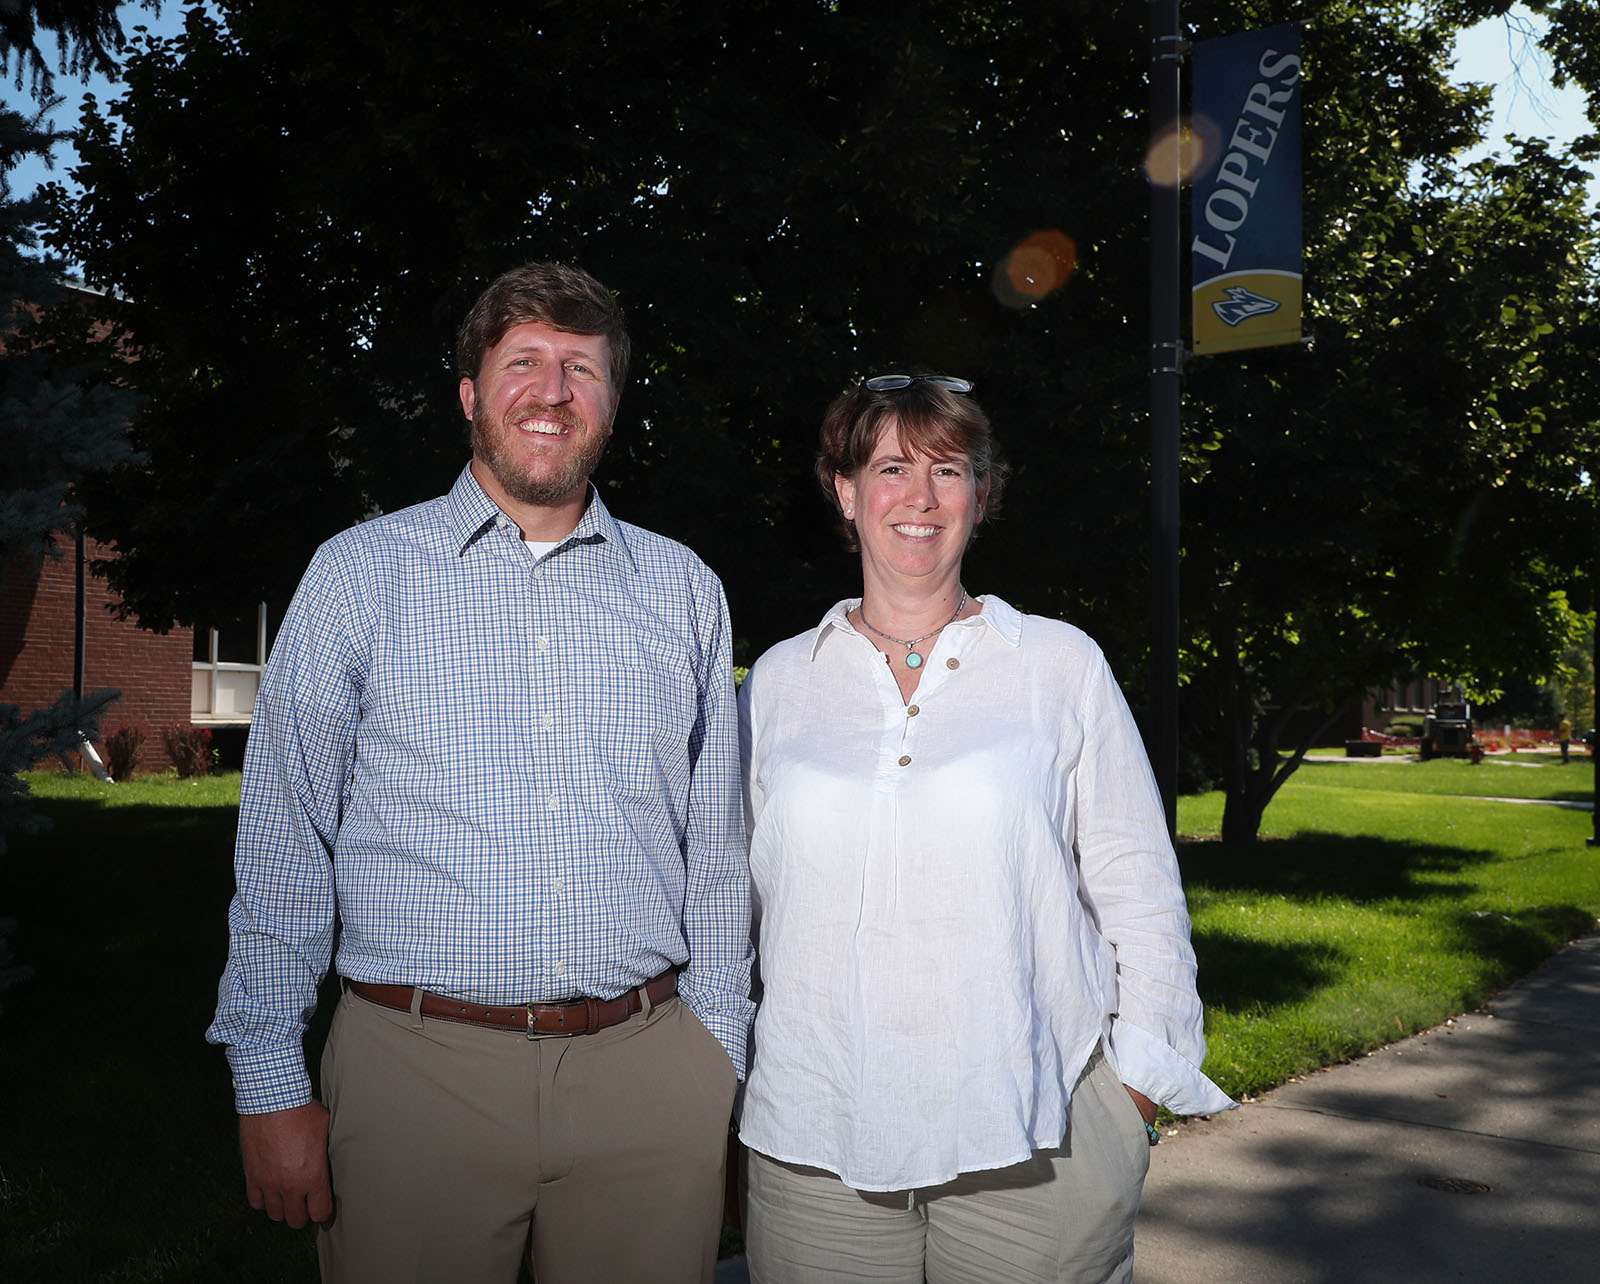 Associate director Aaron Estes and director Amy Rundstrom lead UNK’s Academic Advising and Career Development Office. Located inside the Memorial Student Affairs Building, the office offers a variety of services that help students succeed both during and after their time at UNK. (Photo by Corbey R. Dorsey, UNK Communications)